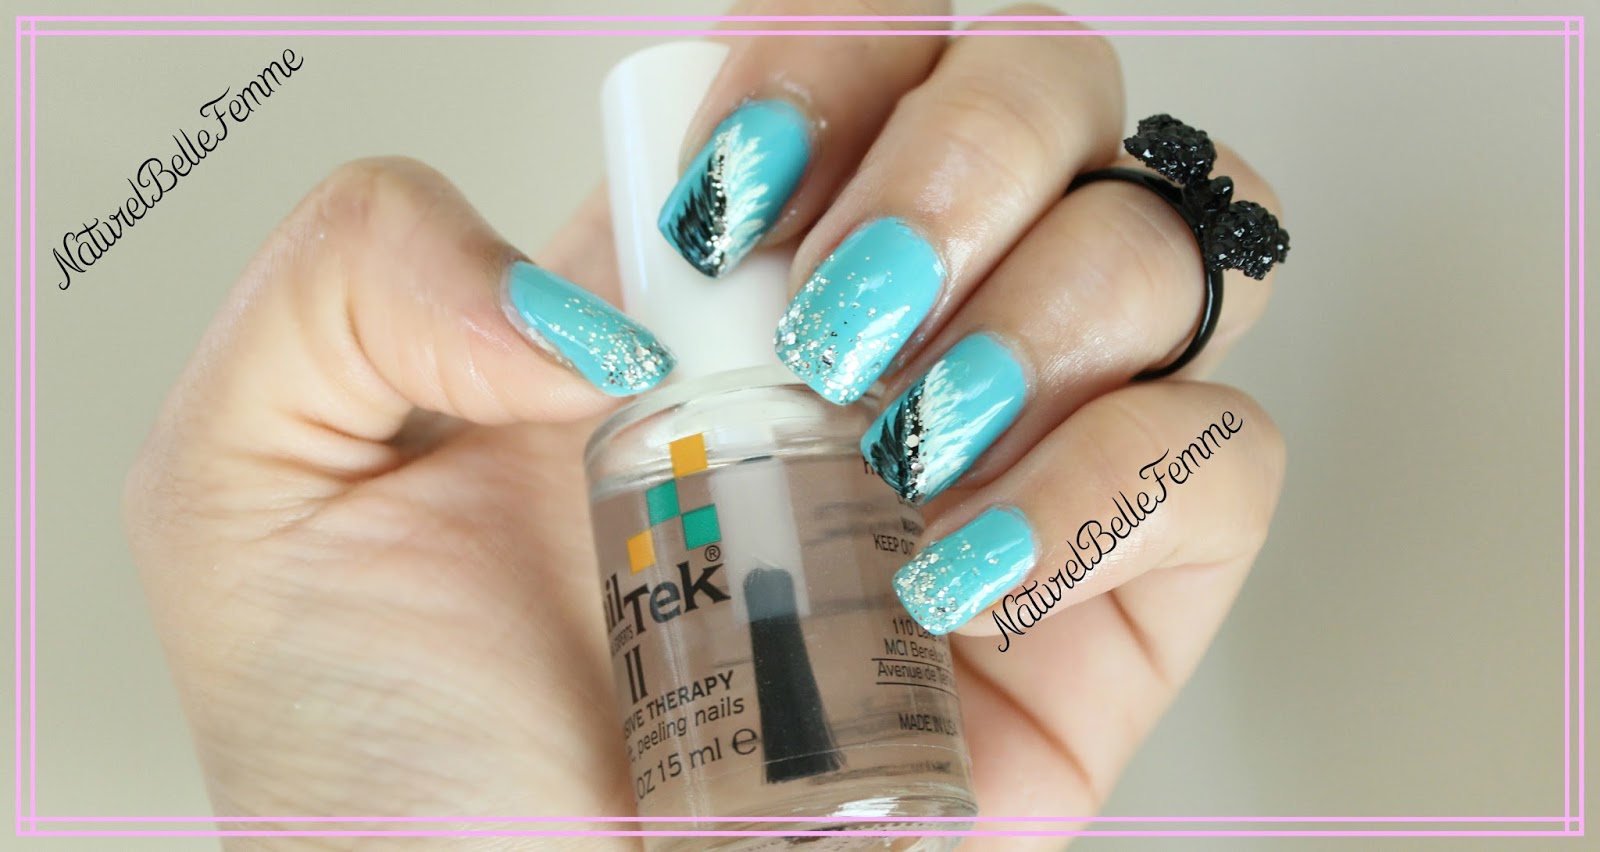 3. DIY Feather Nail Art Tutorial - wide 9